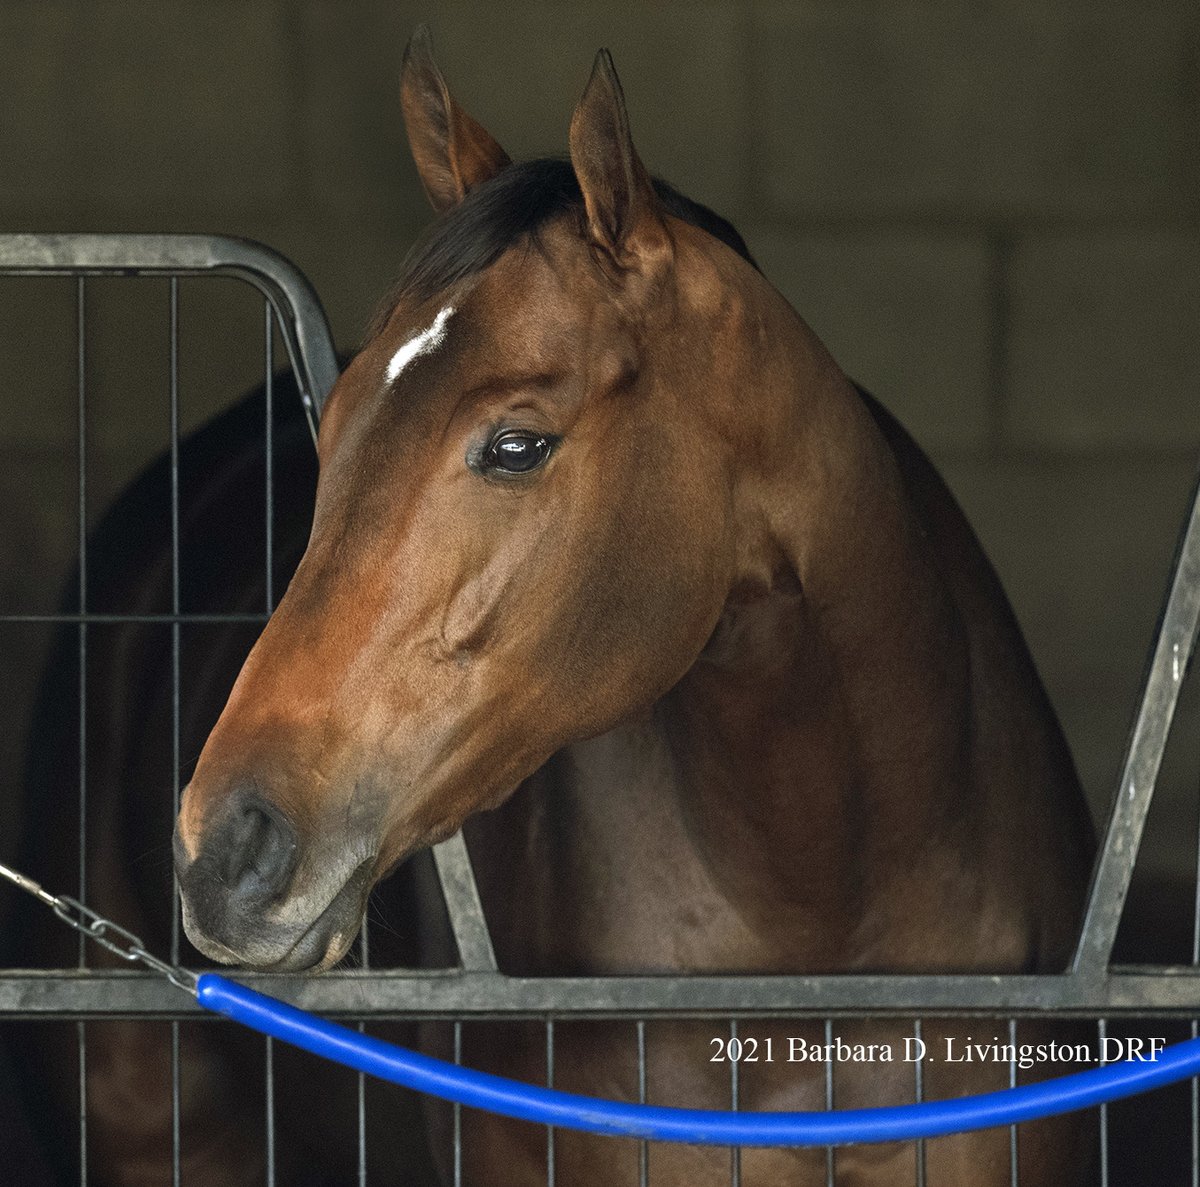 ECHO ZULU at Del Mar on November 1, 2021 Four days later, she won the G1 Breeders' Cup Juvenile Fillies in a runaway performance.